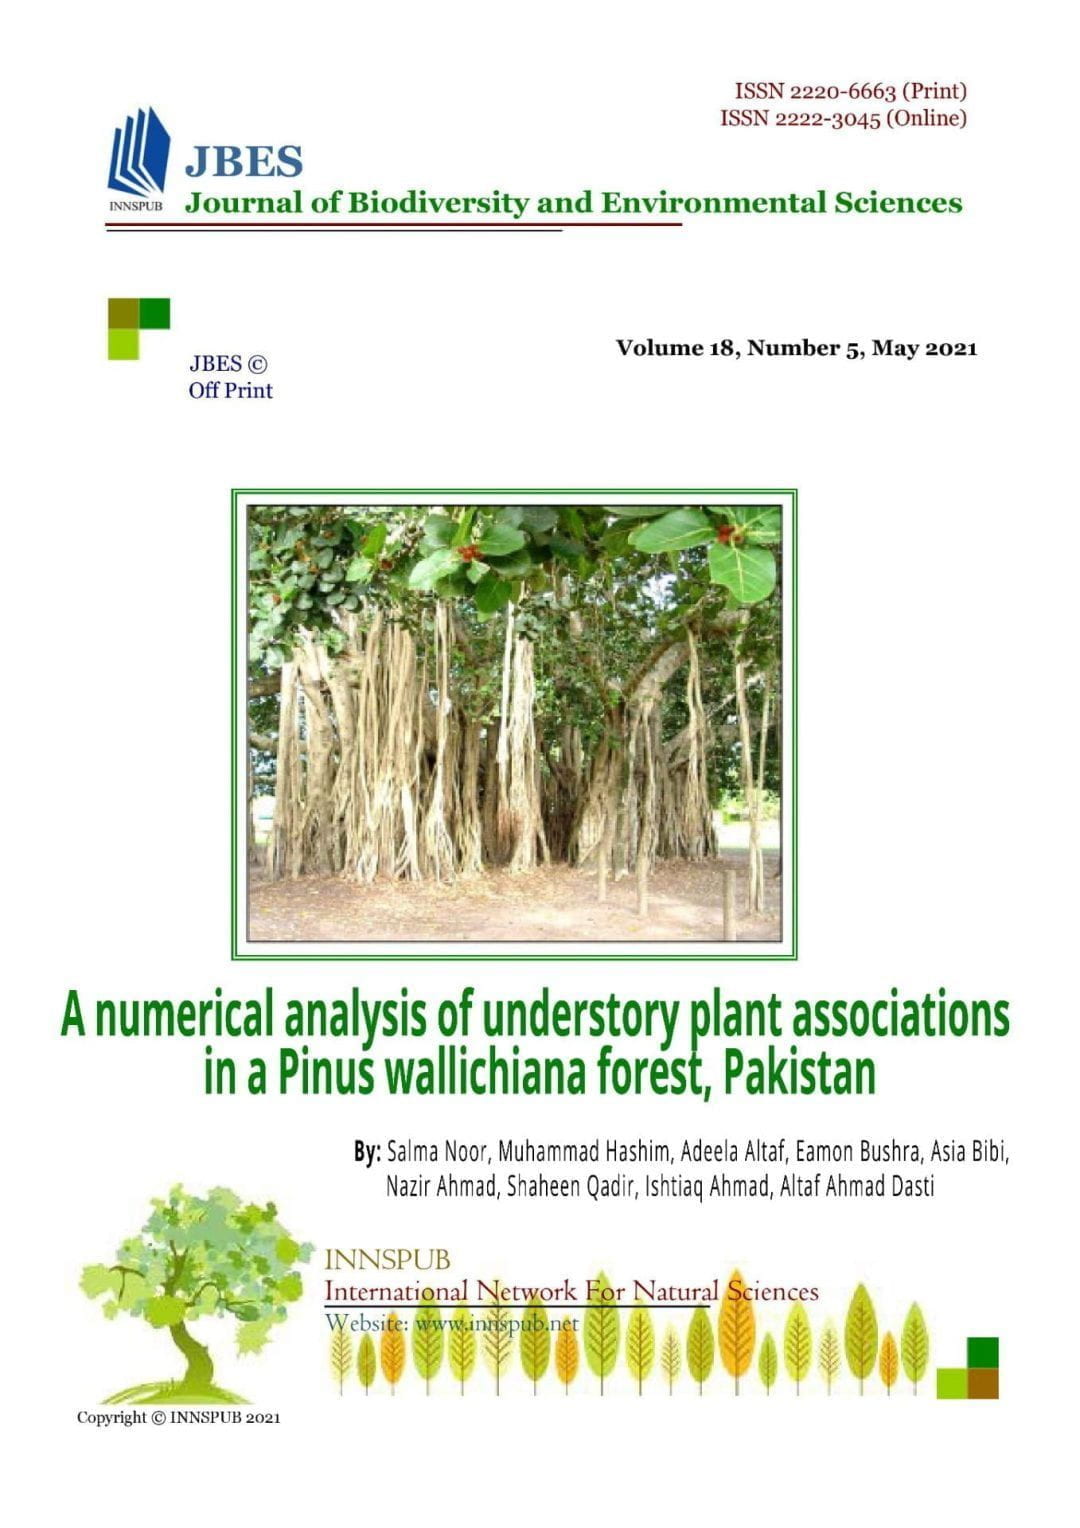 A numerical analysis of understory plant associations in a Pinus wallichiana forest, Pakistan